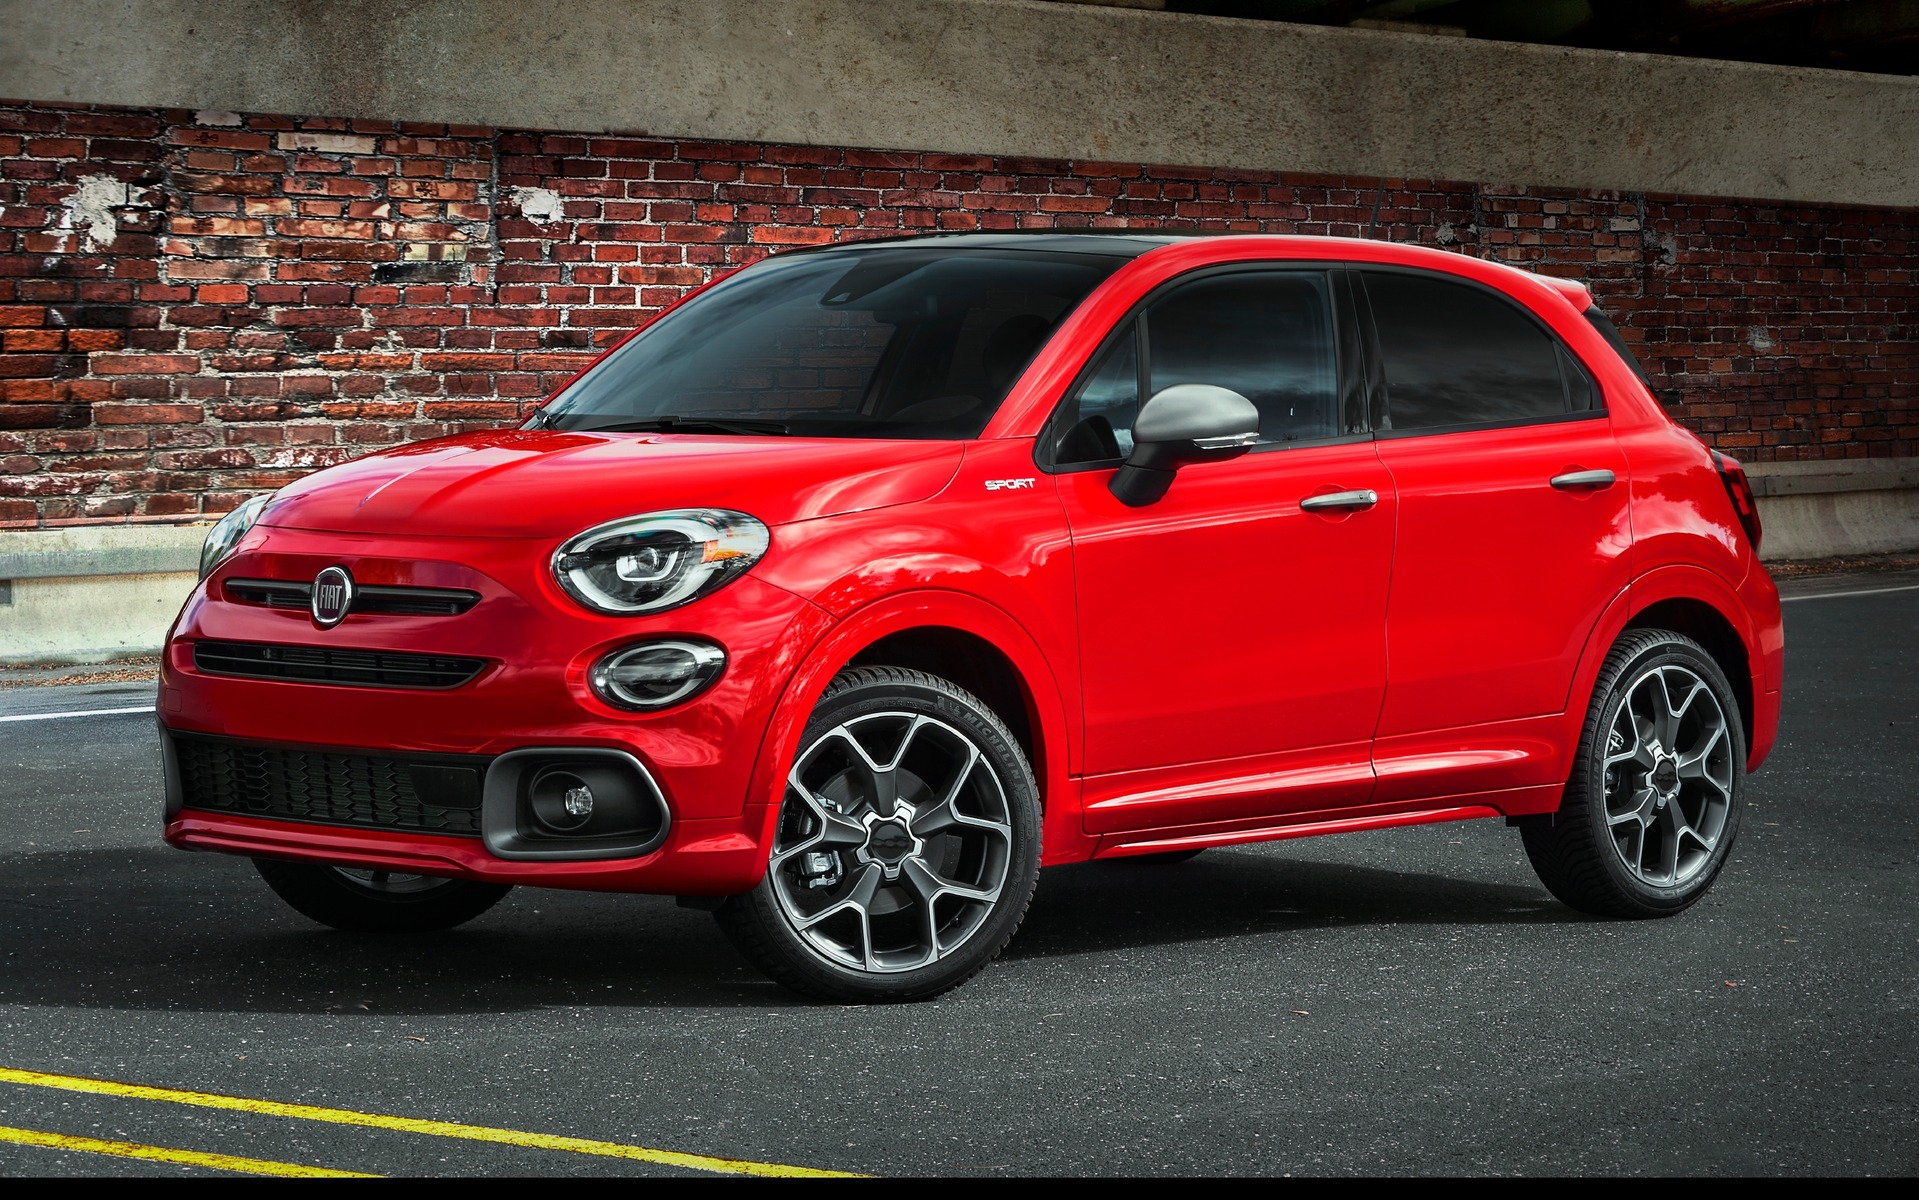 Top 88+ images difference between fiat 500x models - In.thptnganamst.edu.vn